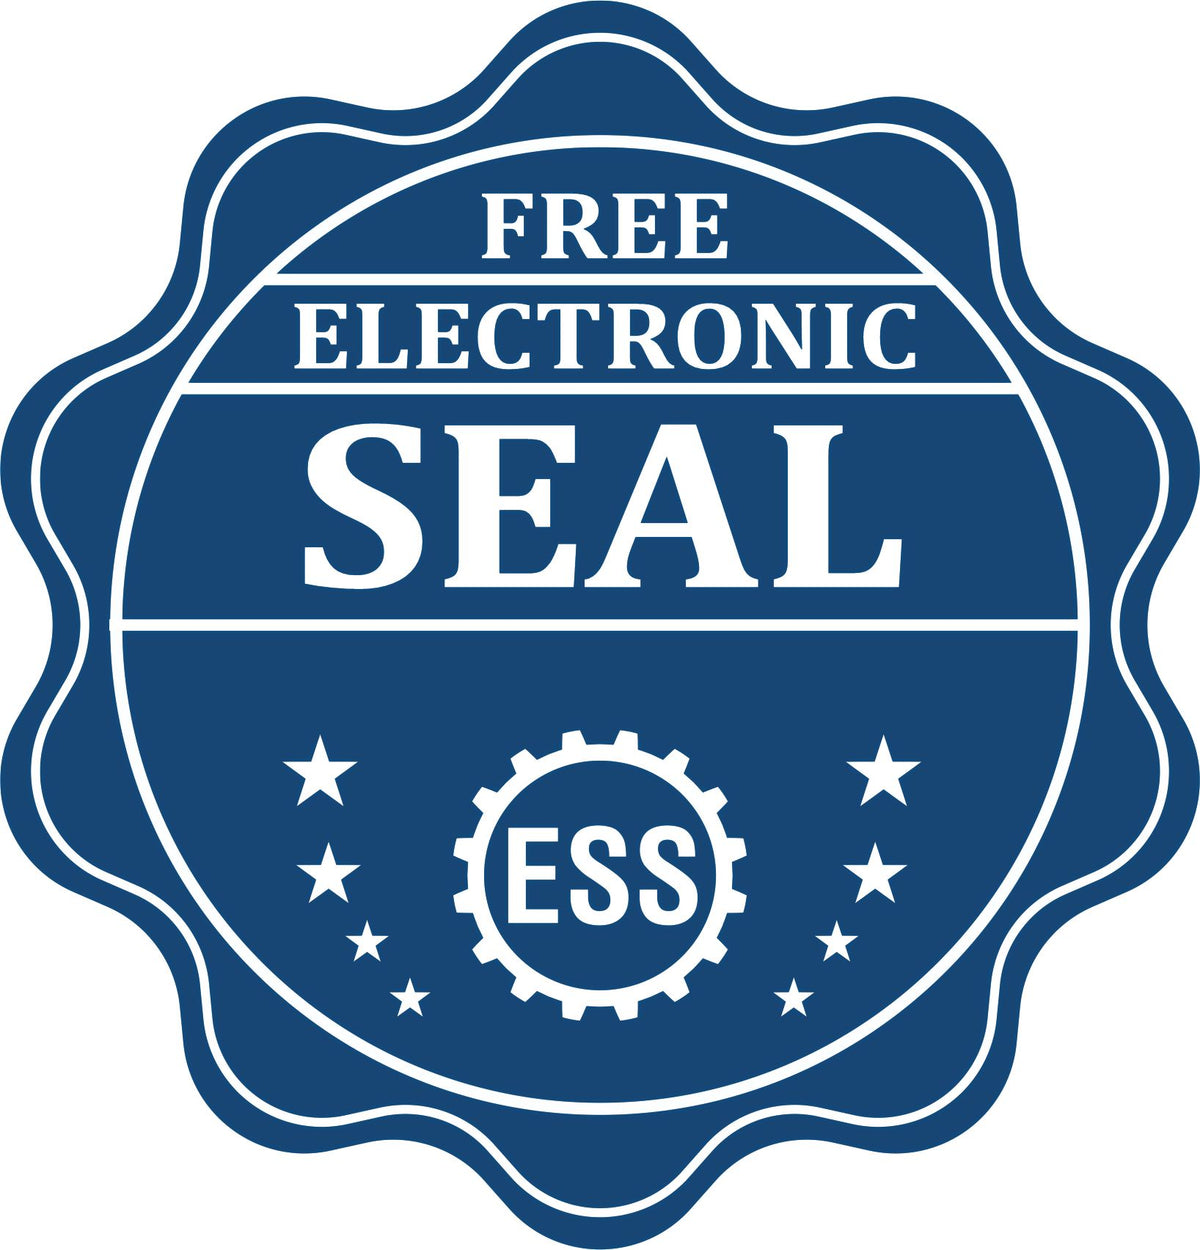 A badge showing a free electronic seal for the Self-Inking Florida Landscape Architect Stamp with stars and the ESS gear on the emblem.